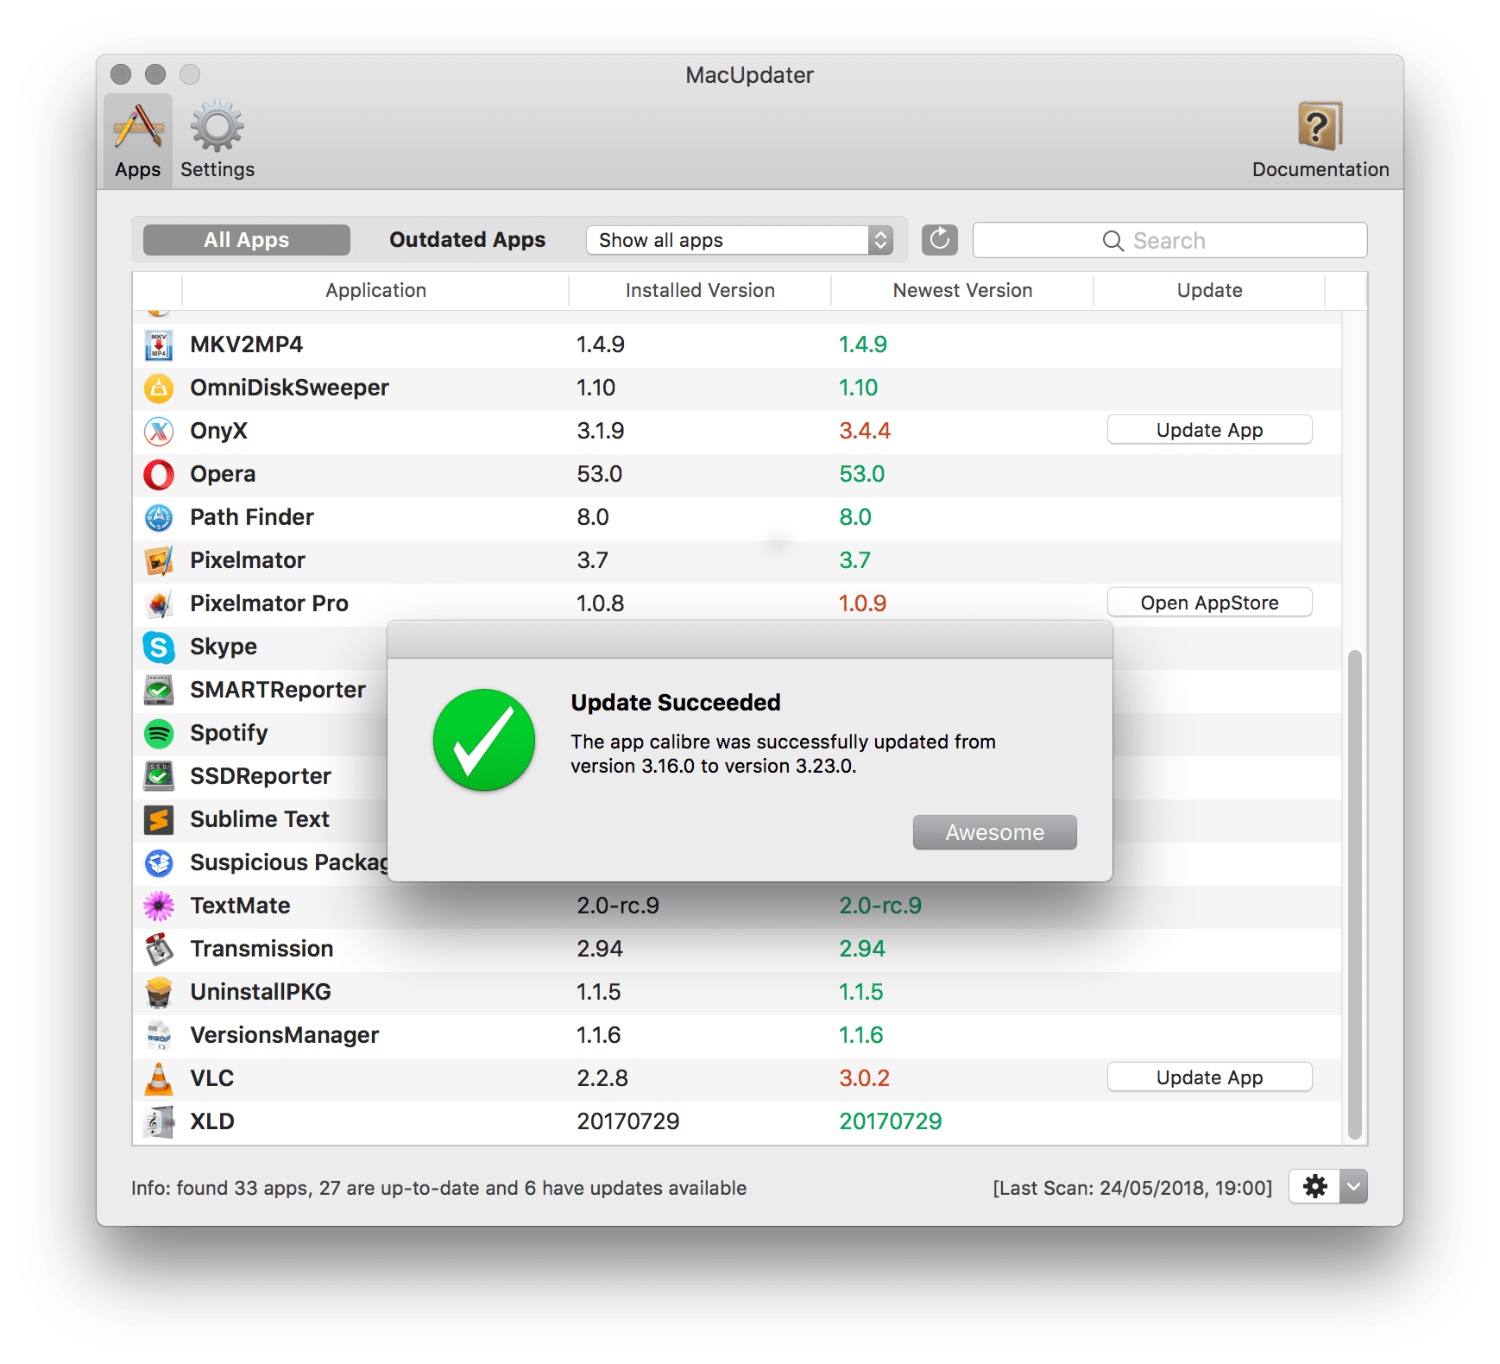 MacUpdater for macOS upgraded to version 1.2.7